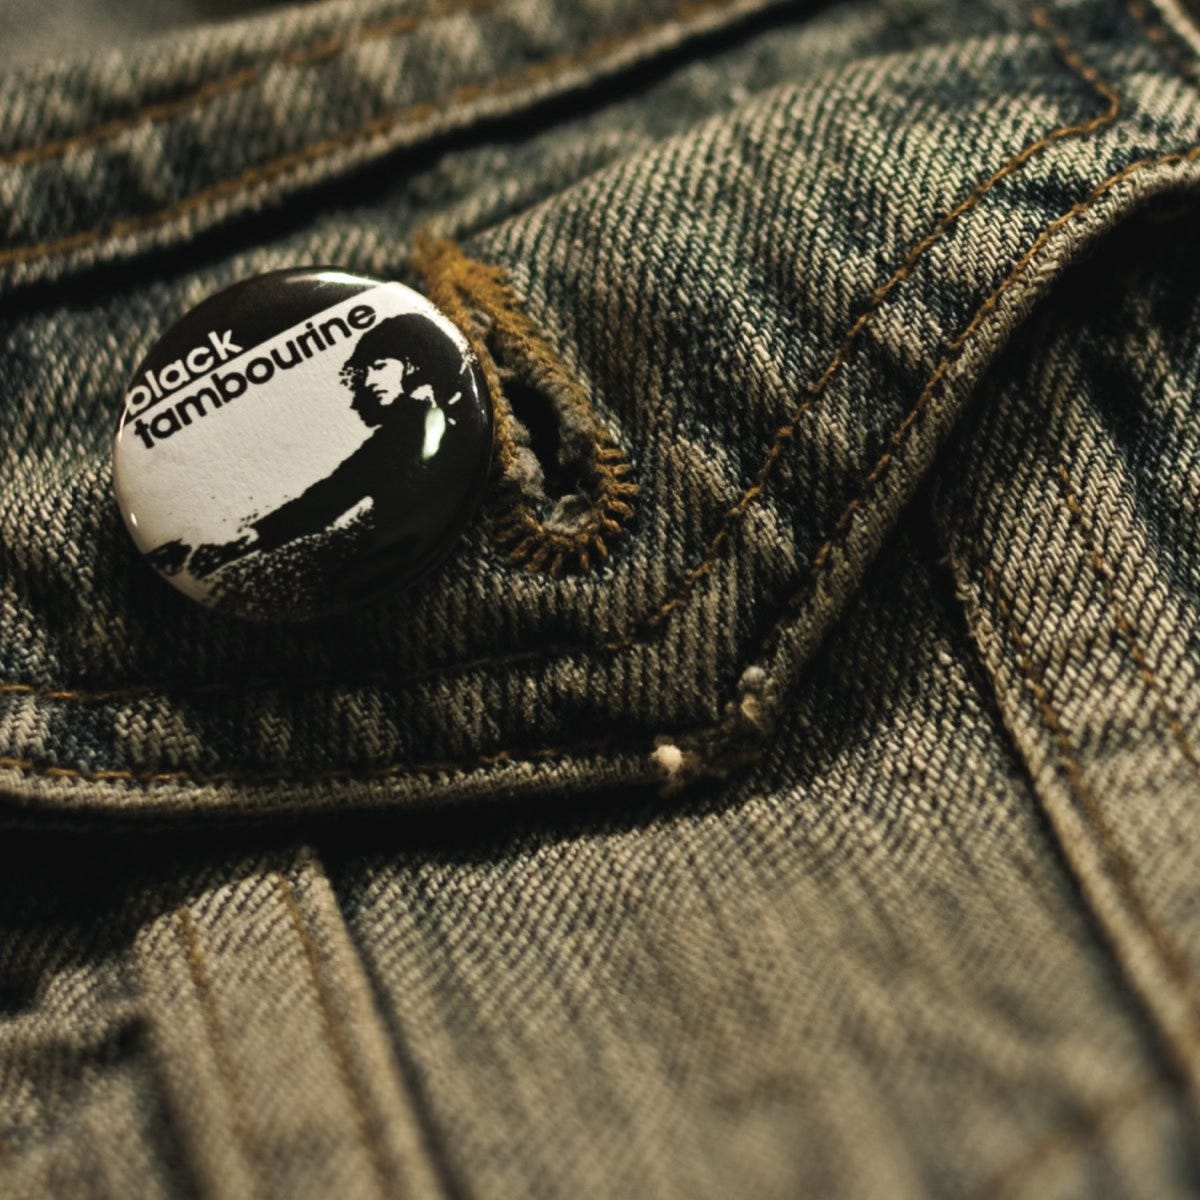 Black Tambourine album cover, with a macro mode photo of a faded denim jacket pocket that has a small black tambourine button pinned to it